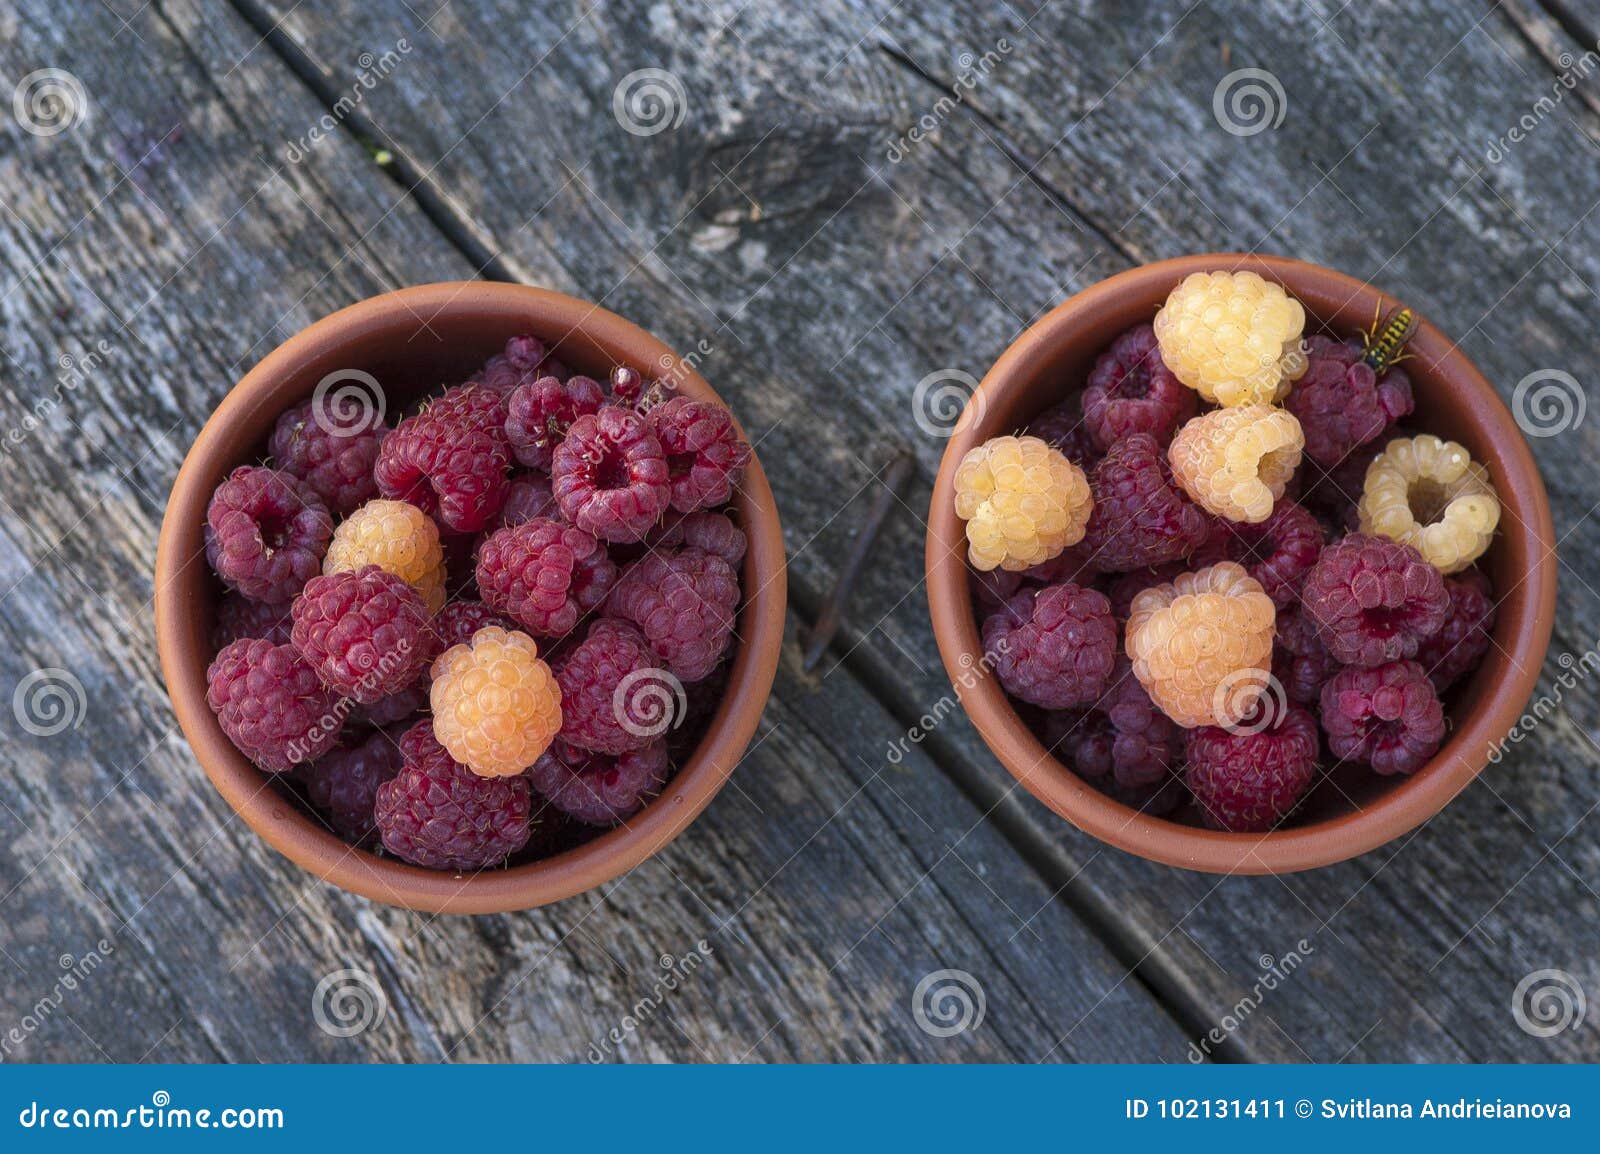 Download Red And Yellow Raspberries In A Cup Stock Image Image Of Background Gray 102131411 Yellowimages Mockups